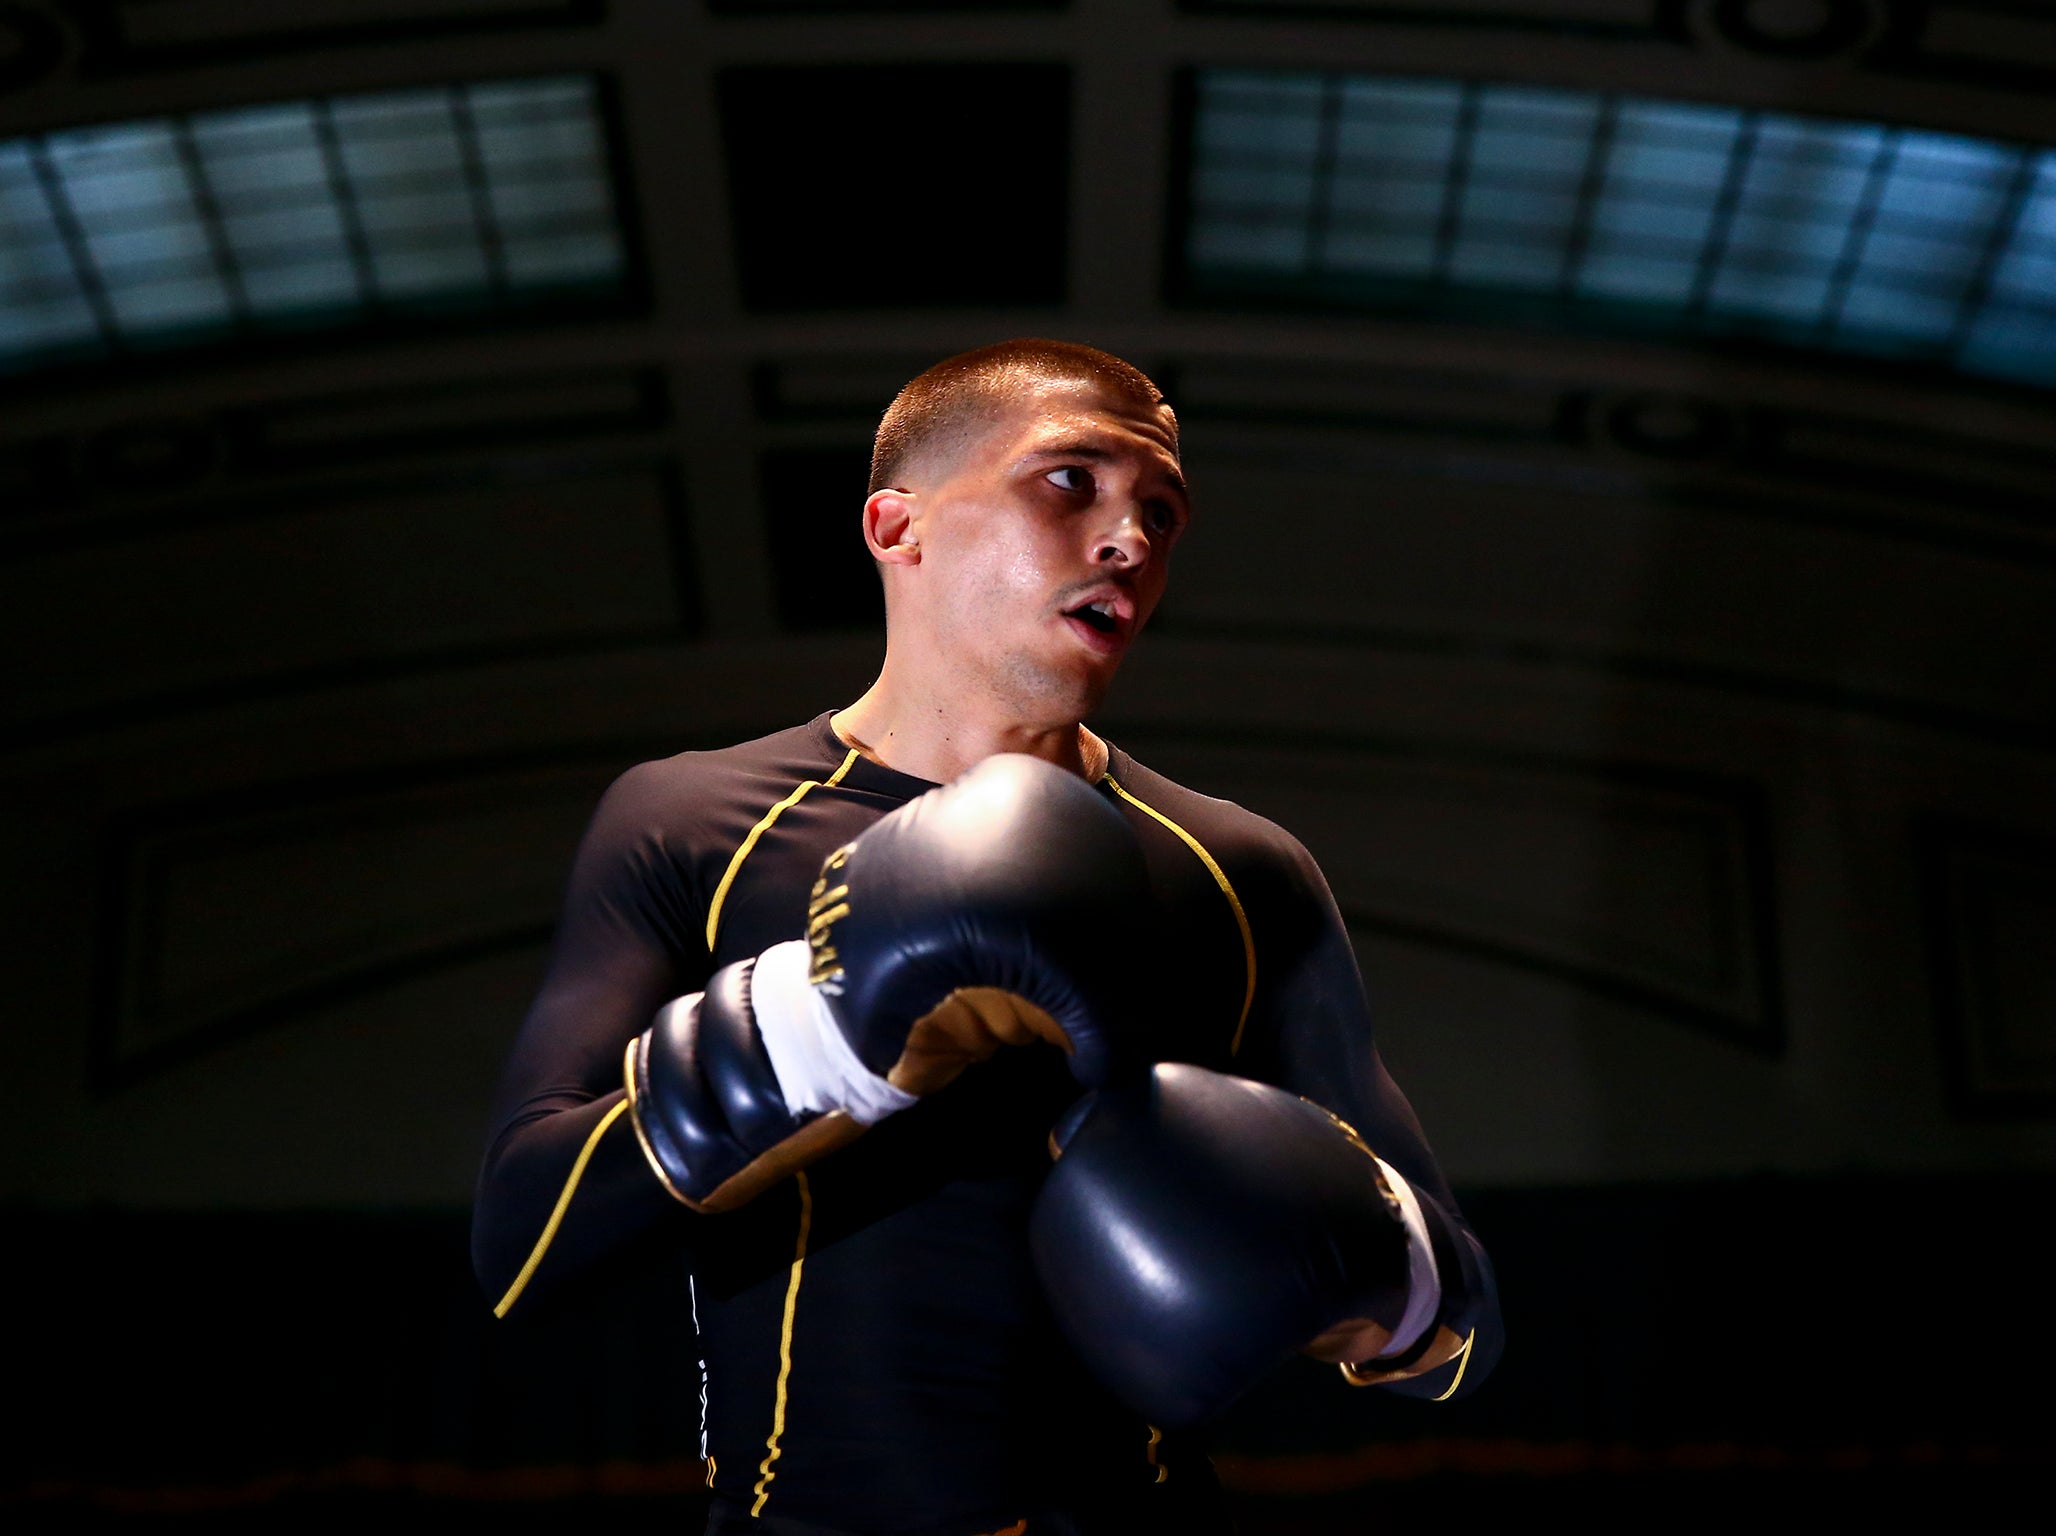 Lee Selby is stepping up in weight